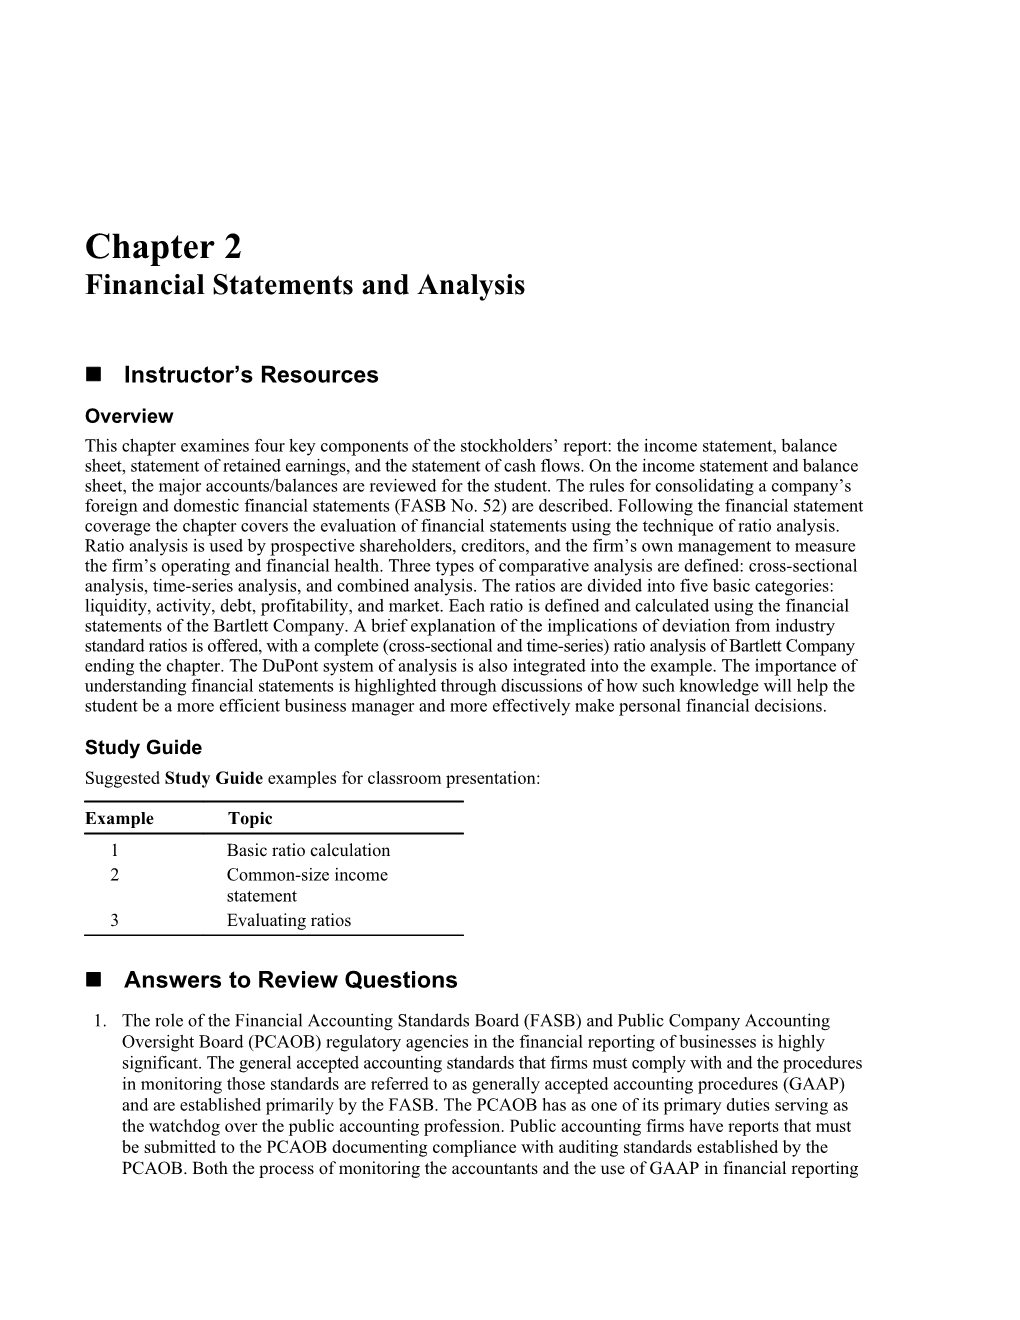 Chapter 2 Financial Statements and Analysis